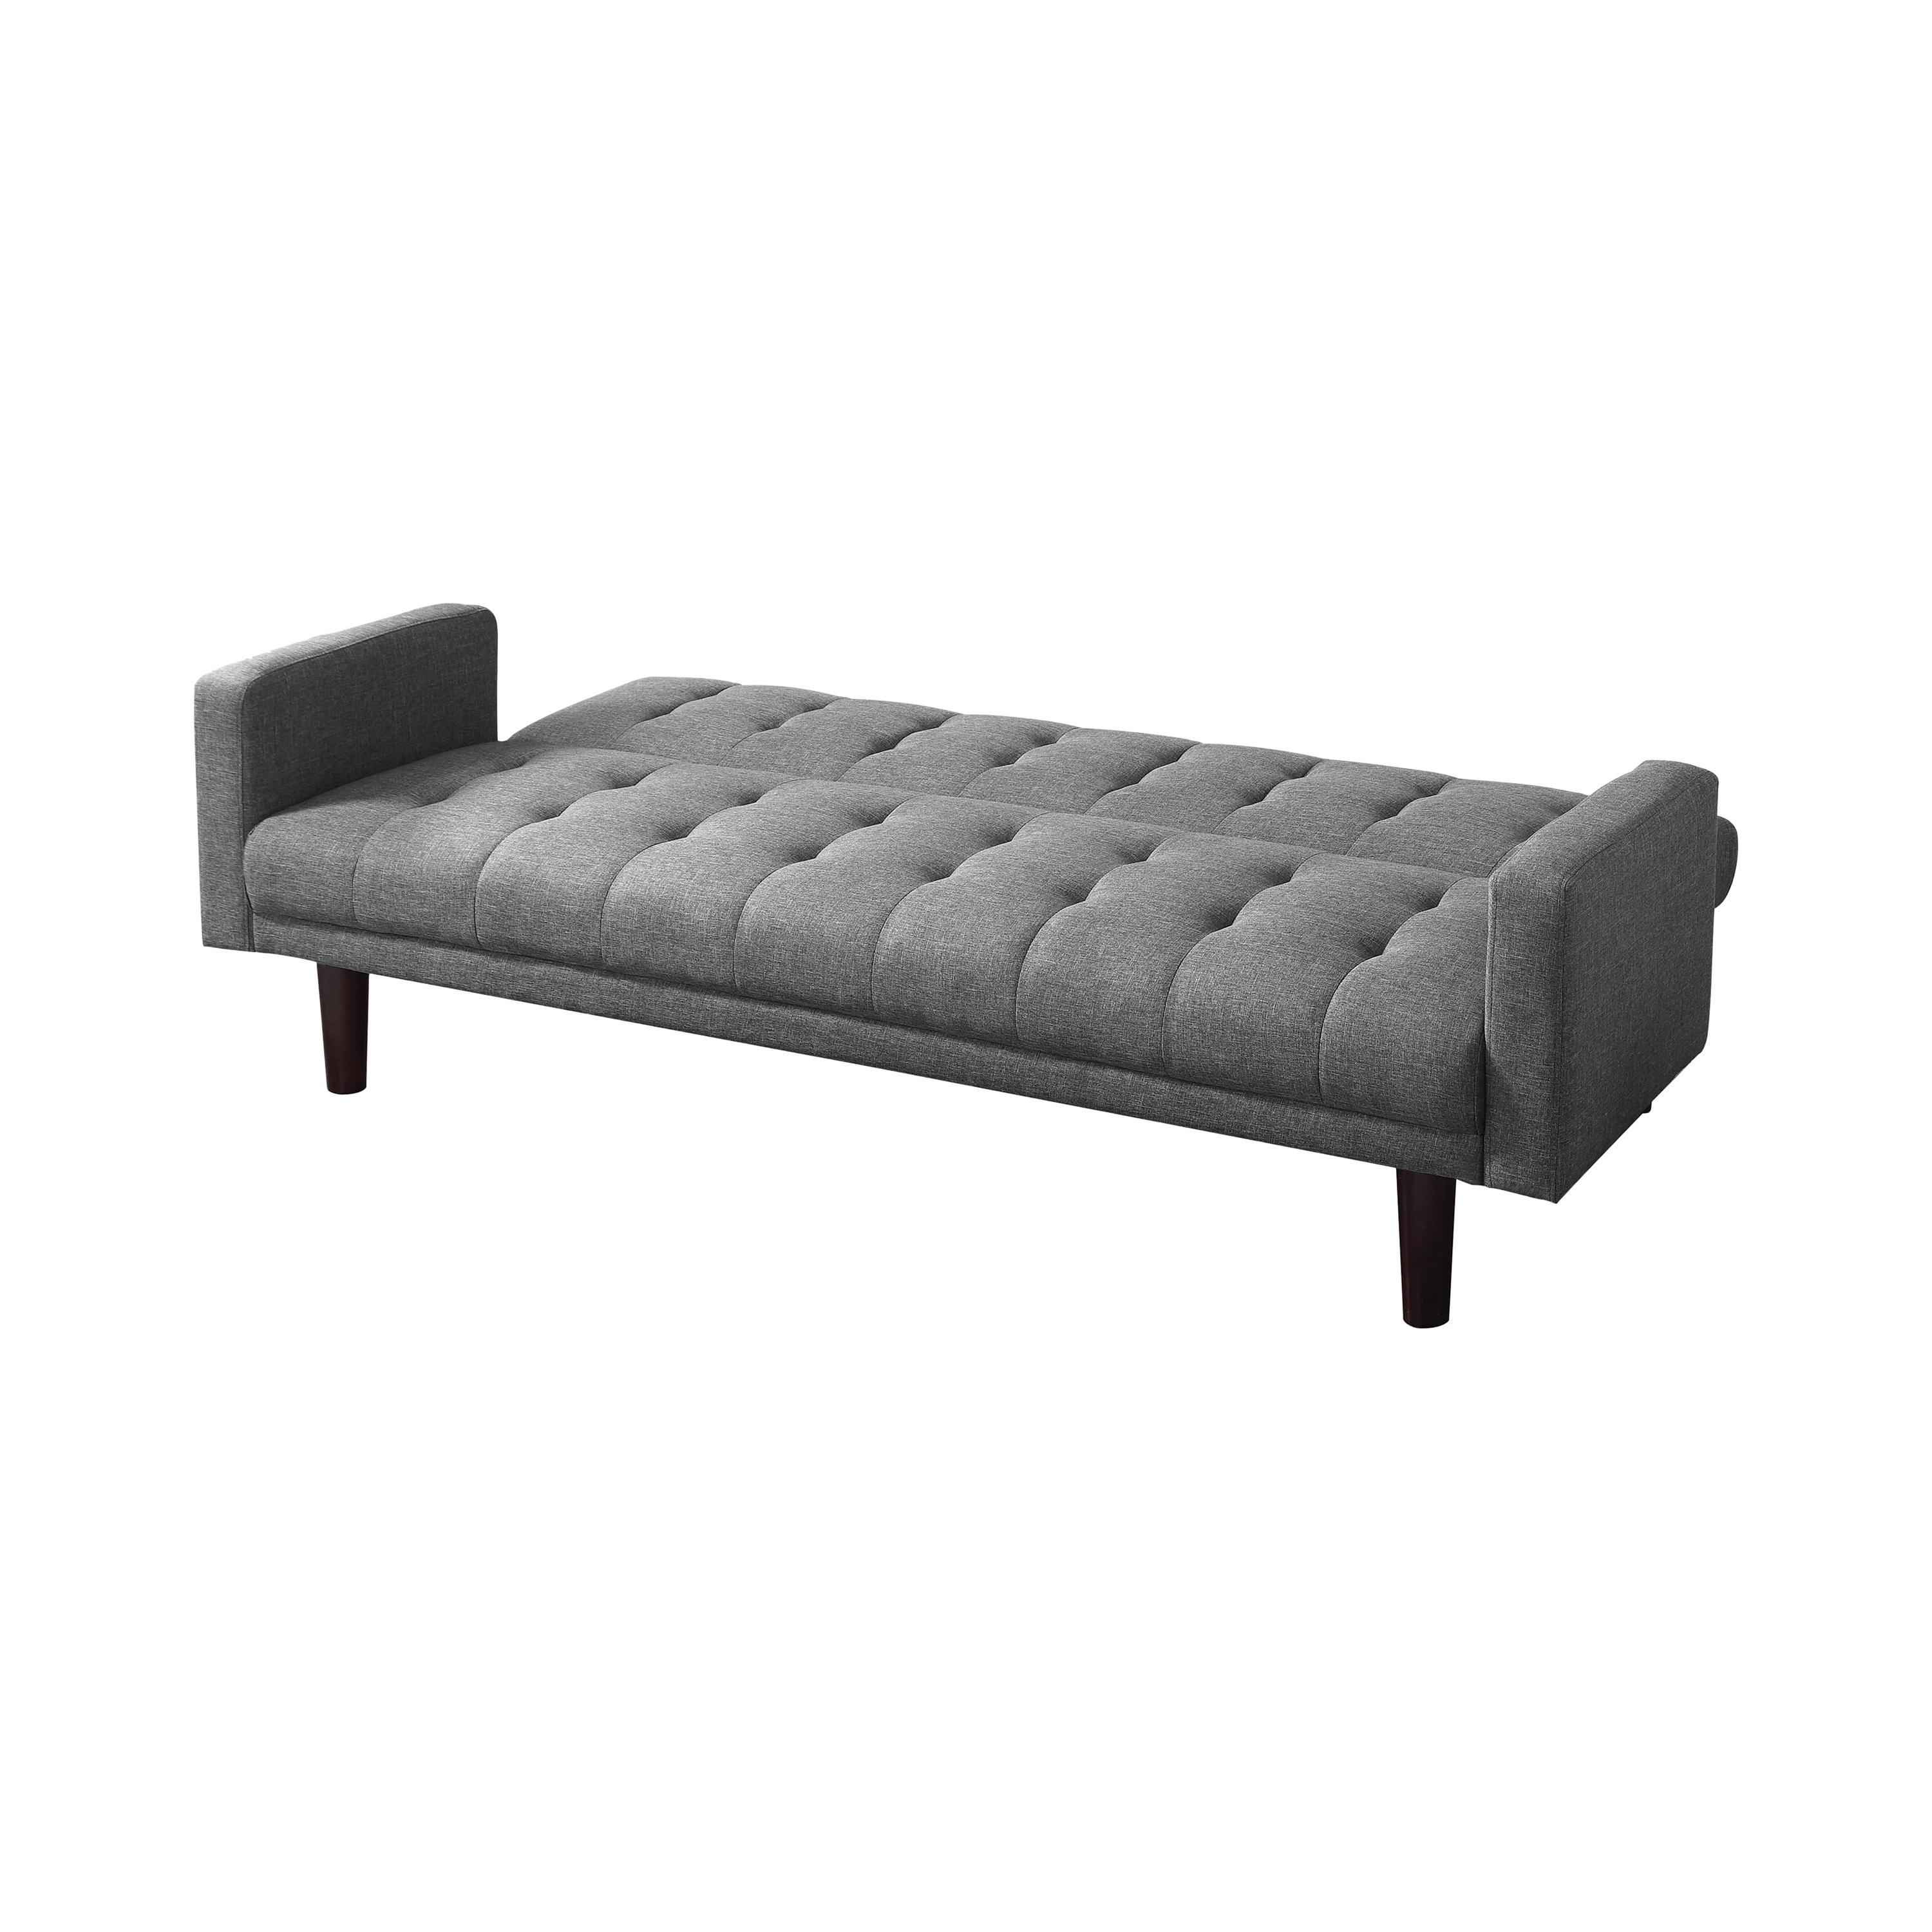 

    
Contemporary Gray Woven Fabric Sofa Bed Coaster 360150 Sommer
